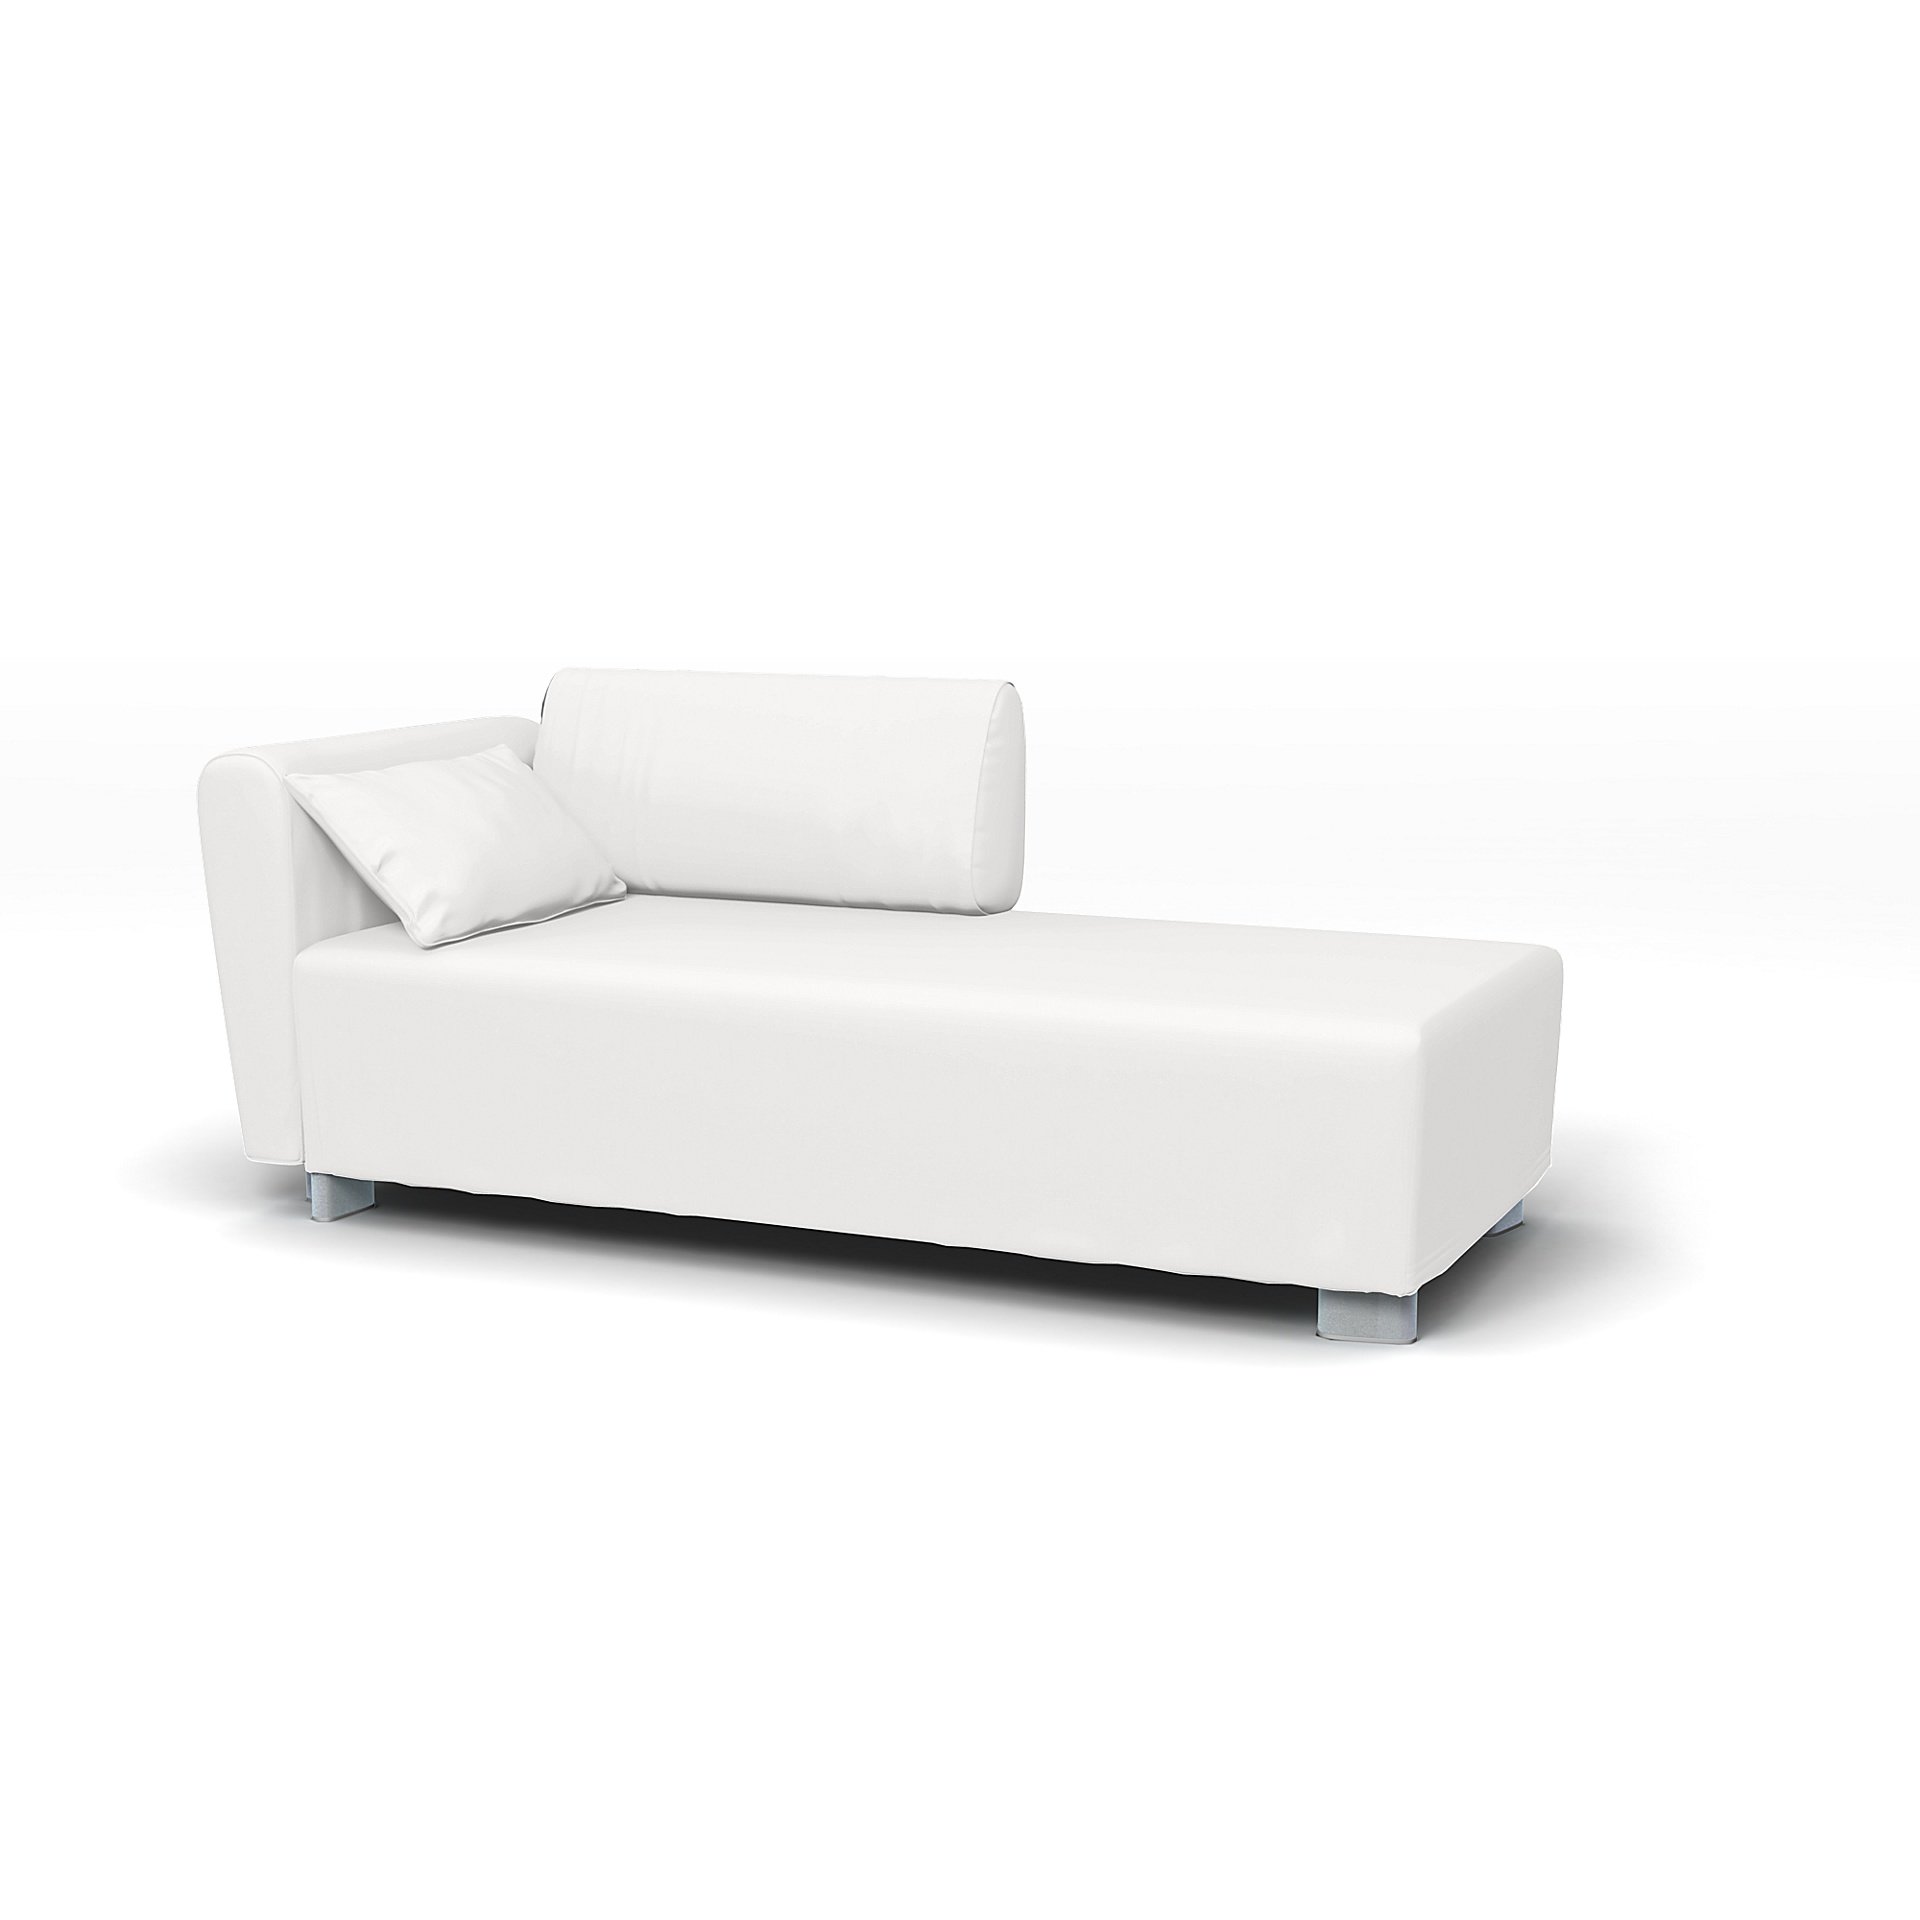 IKEA - Mysinge Chaise Longue with Armrest Cover, Absolute White, Cotton - Bemz